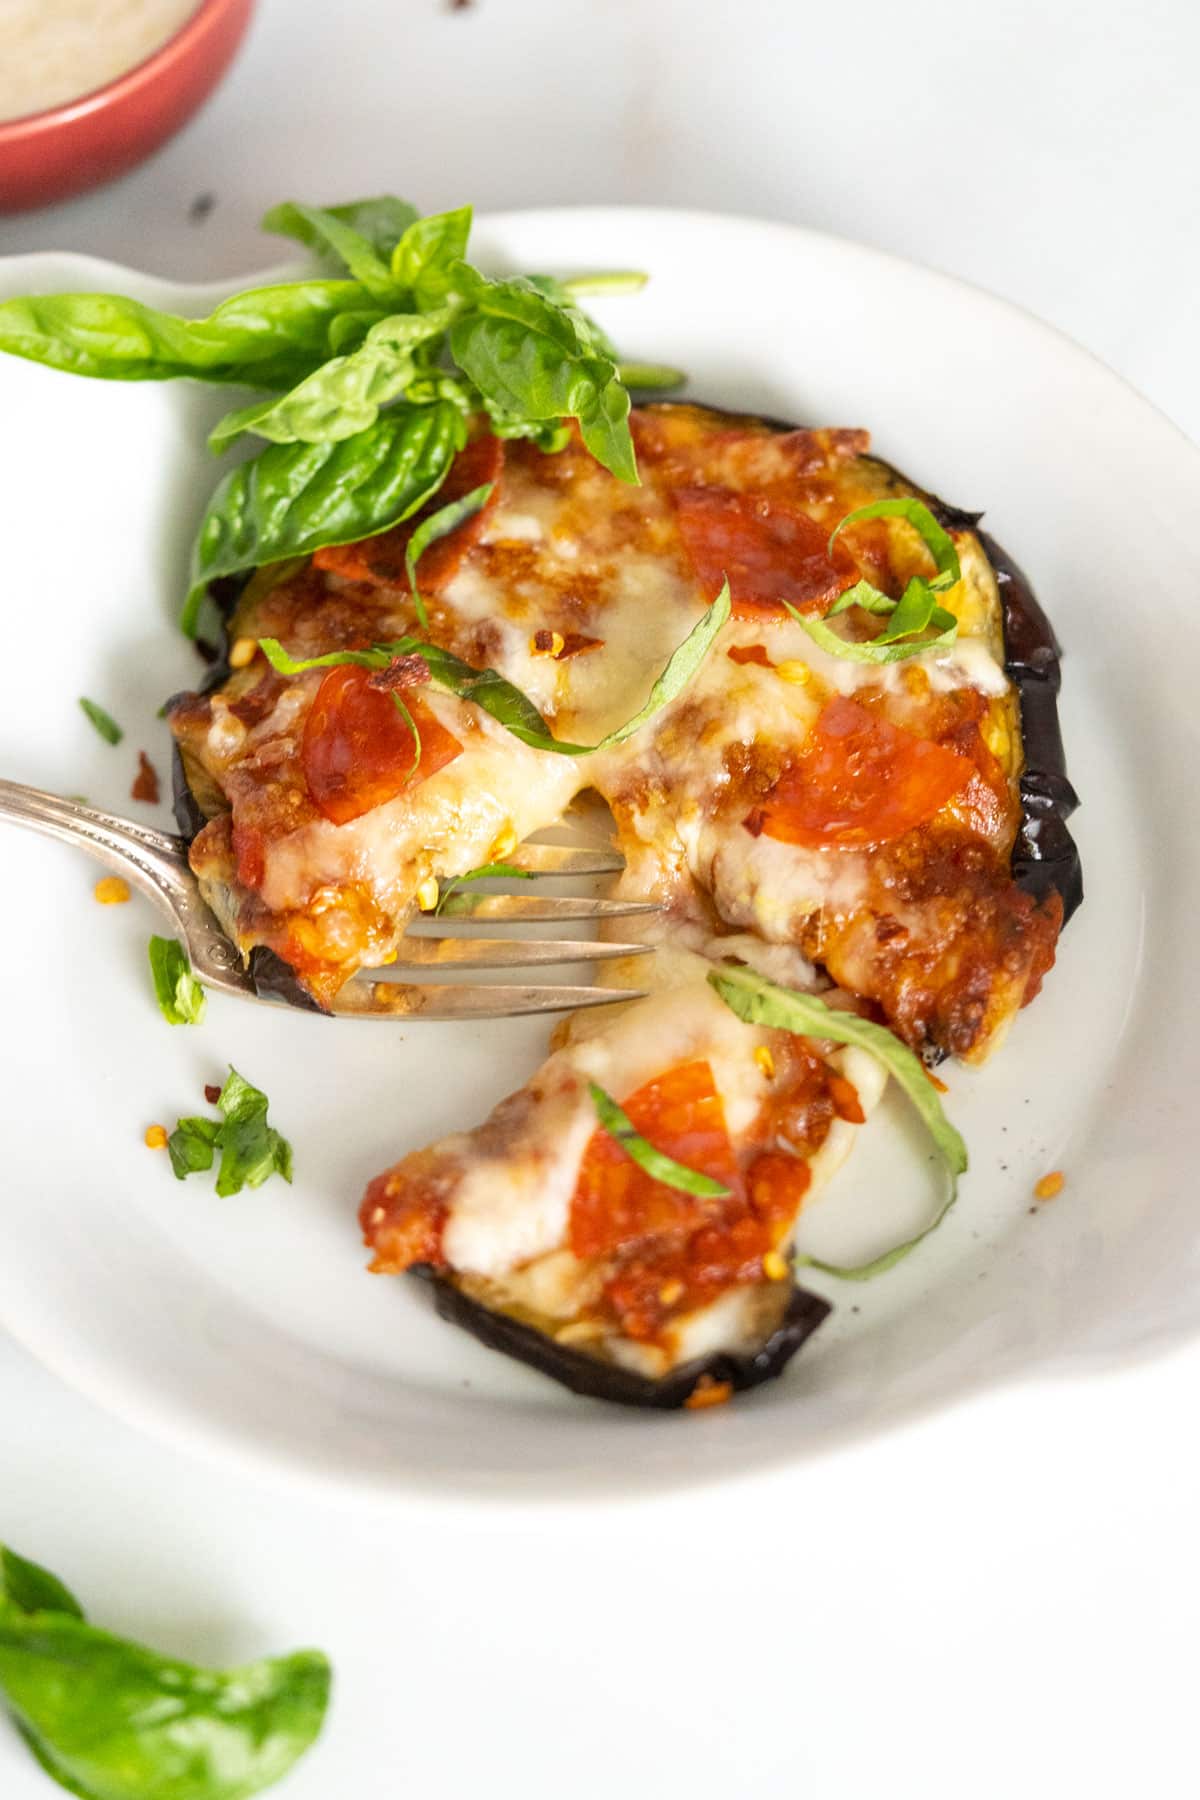 An eggplant pizza on a plate with a bite out of it.